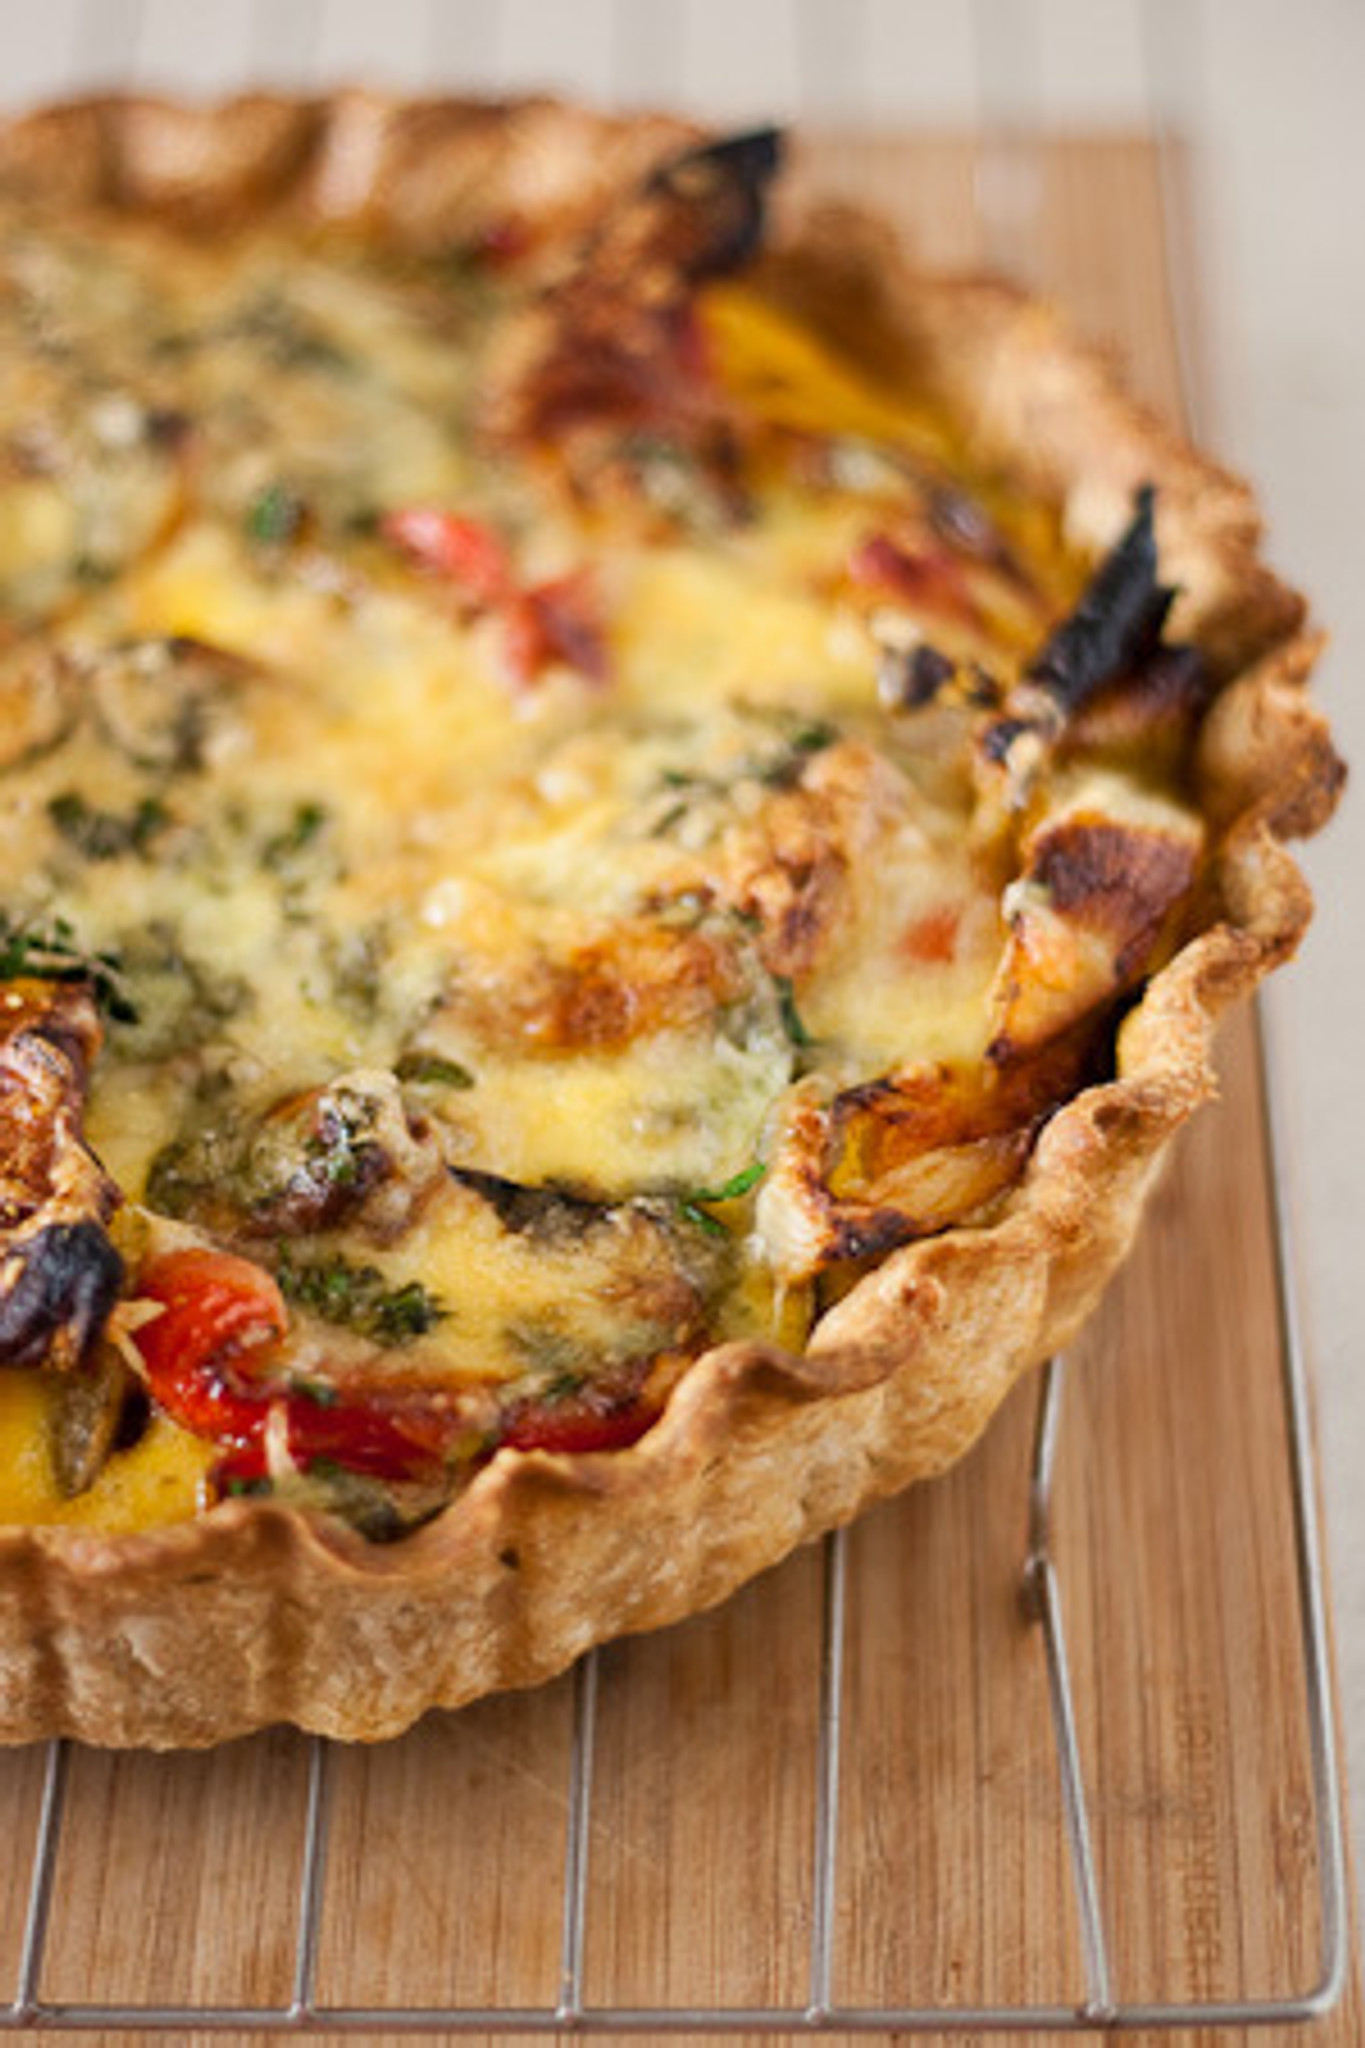 Roasted Vegetable Quiche - serves 6